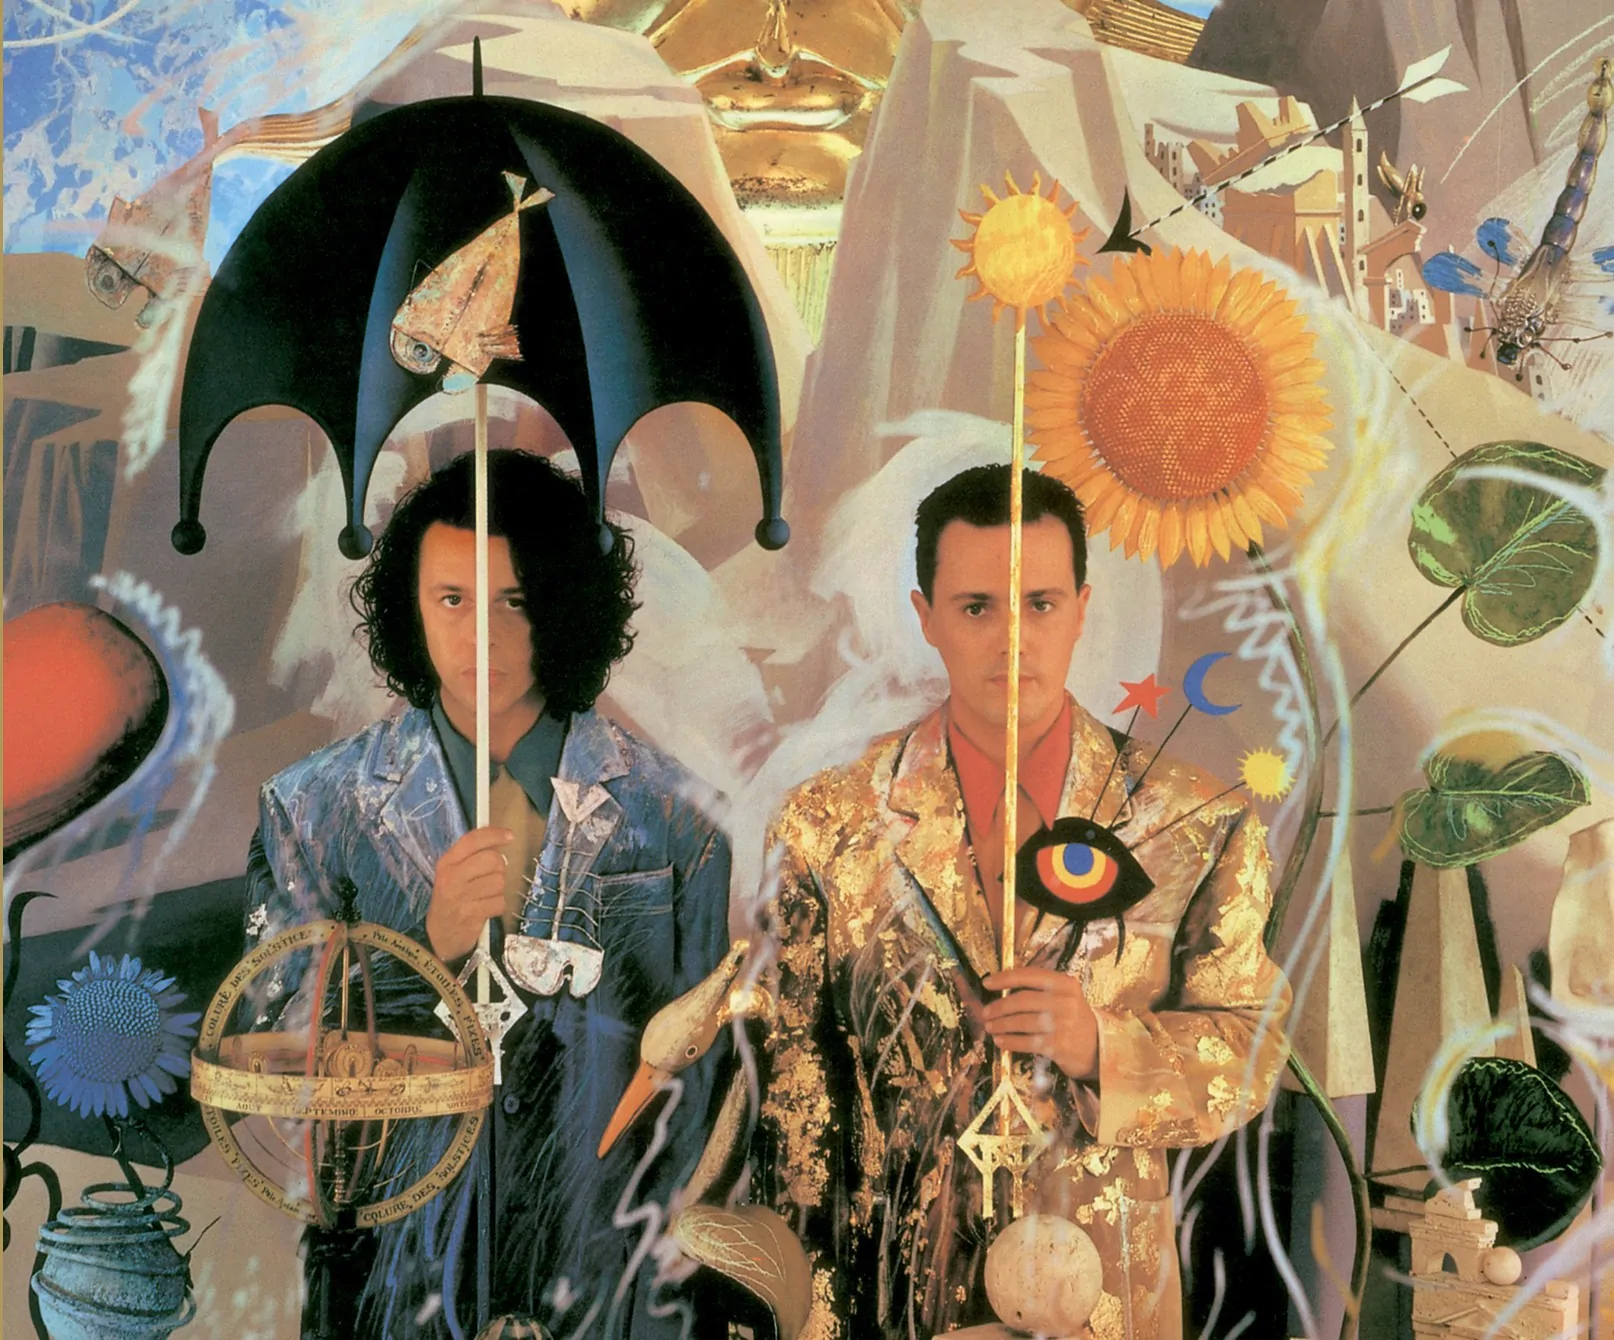 TEARS FOR FEARS announce ‘The Seeds Of Love’ 4CD / Blu ray super deluxe edition